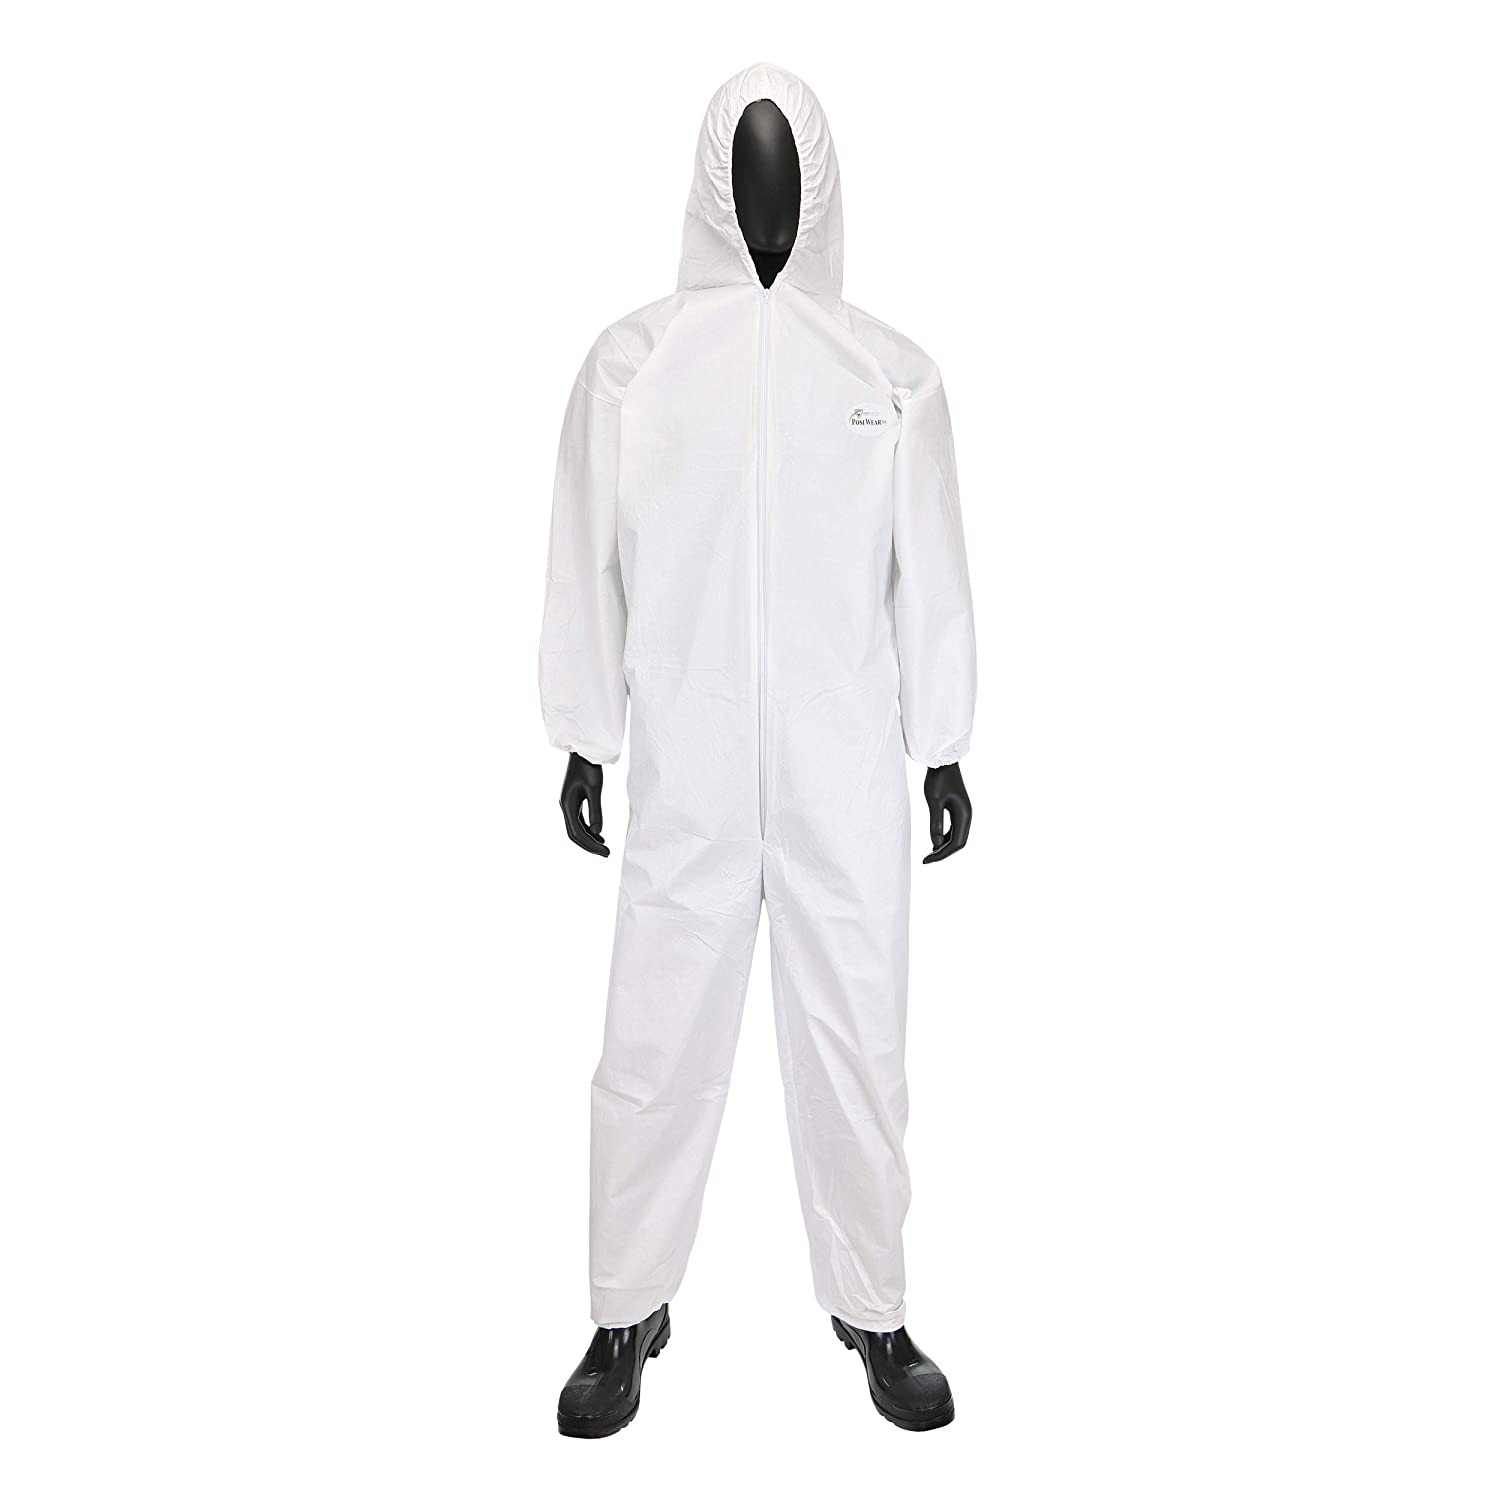 West Chester 3609 Polypropylene PosiWear BA: Breathable Advantage Microporous Coverall – [Pack of 25] XX-Large, Safety Overall with Boots, Attached, Hood Elastic Wrist, Ankle